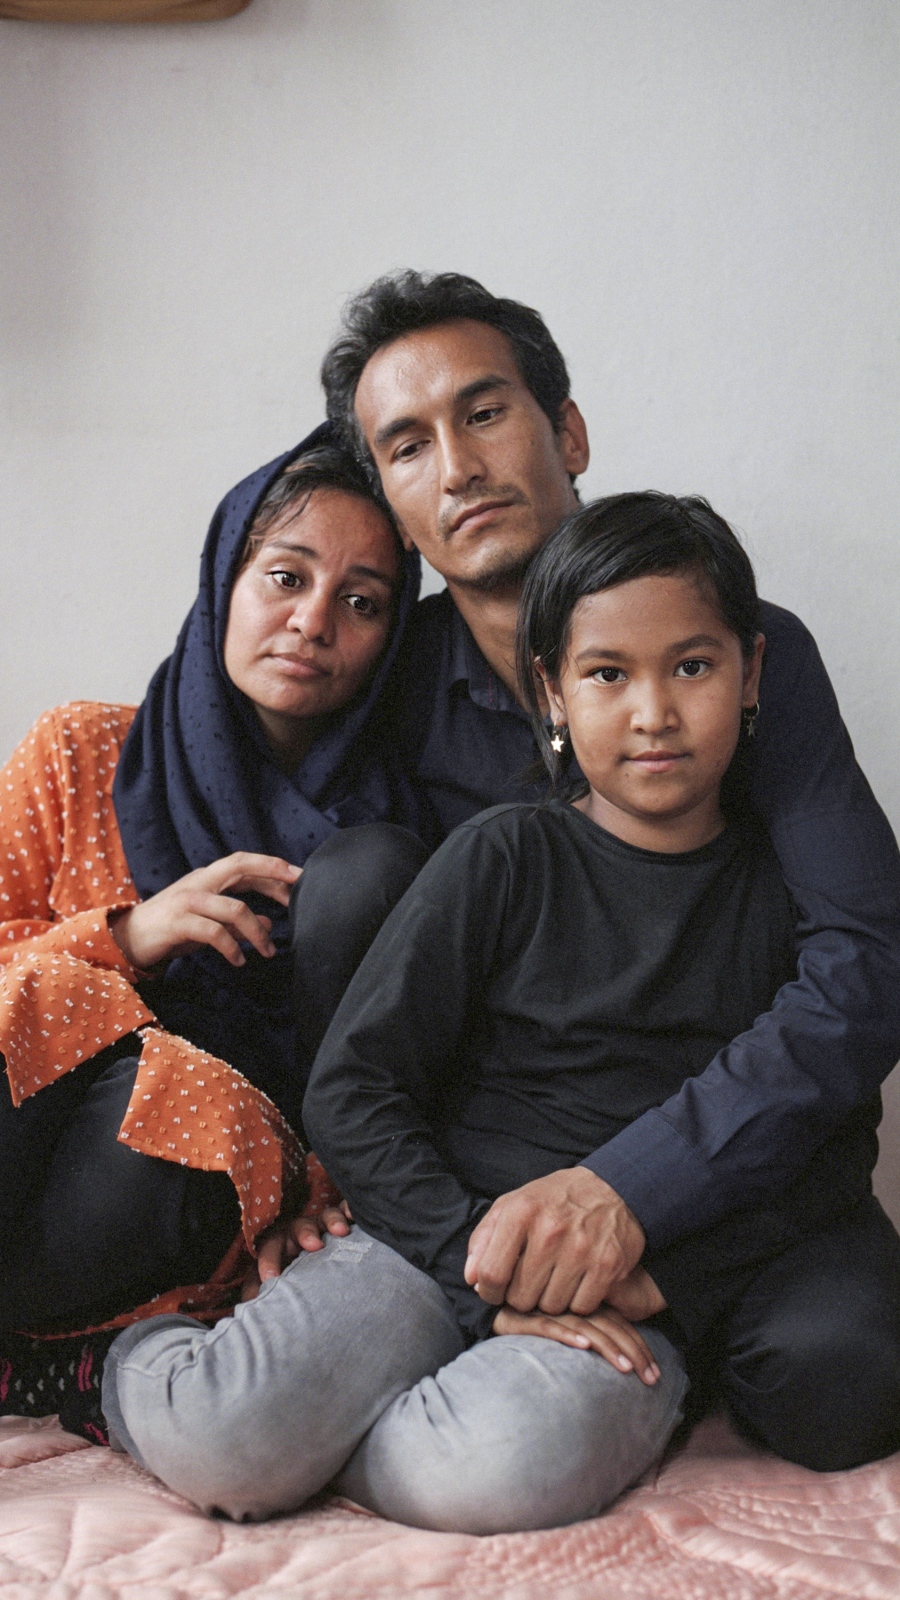 NPR Visuals - His Family Fled Afghanistan. In Turkey, Other Afghans Help Them Build A New Life